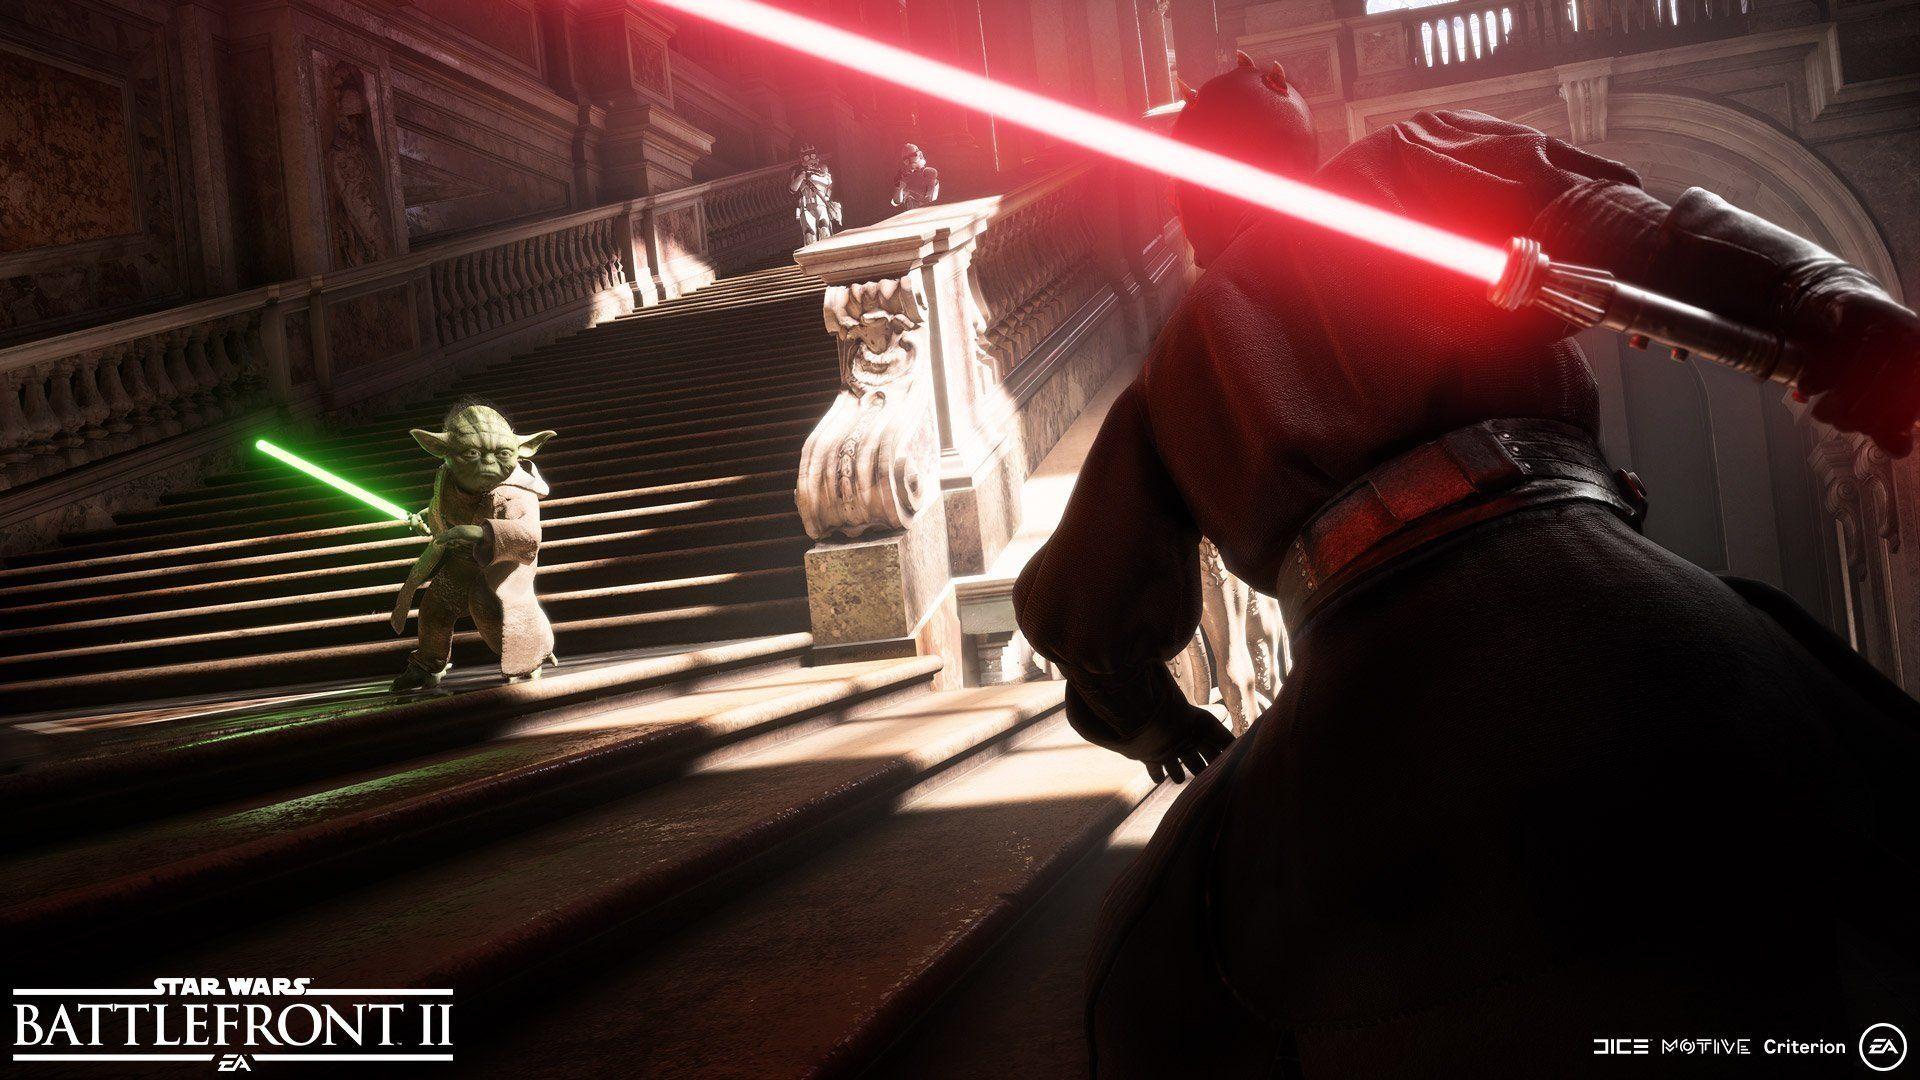 Star Wars Battlefront II (2017) Full HD Wallpaper and Background